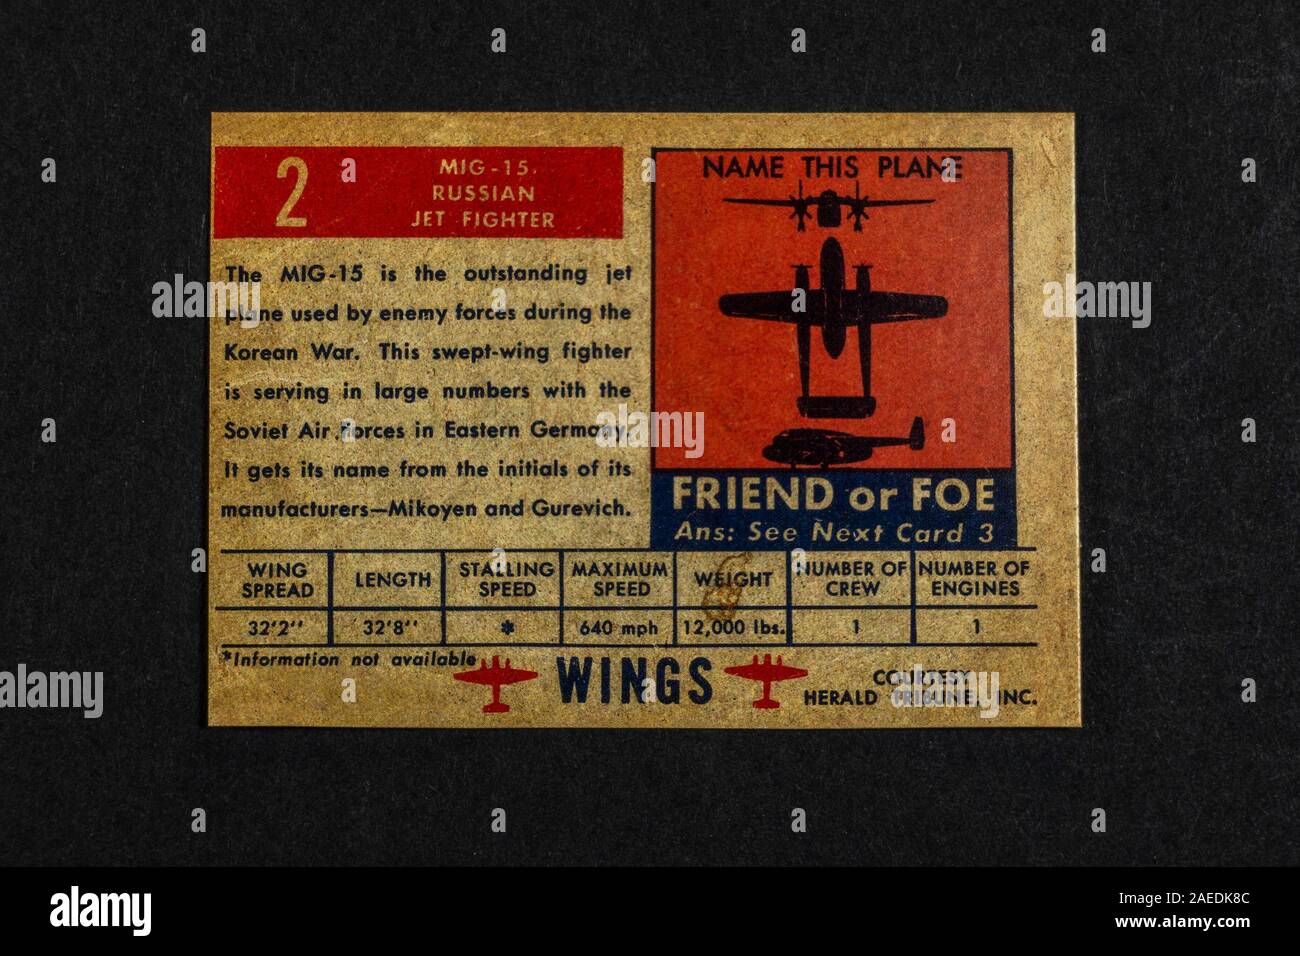 Card allowing for "friend or foe" military plane identification, a piece of replica memorabilia from the Cold War era. Stock Photo